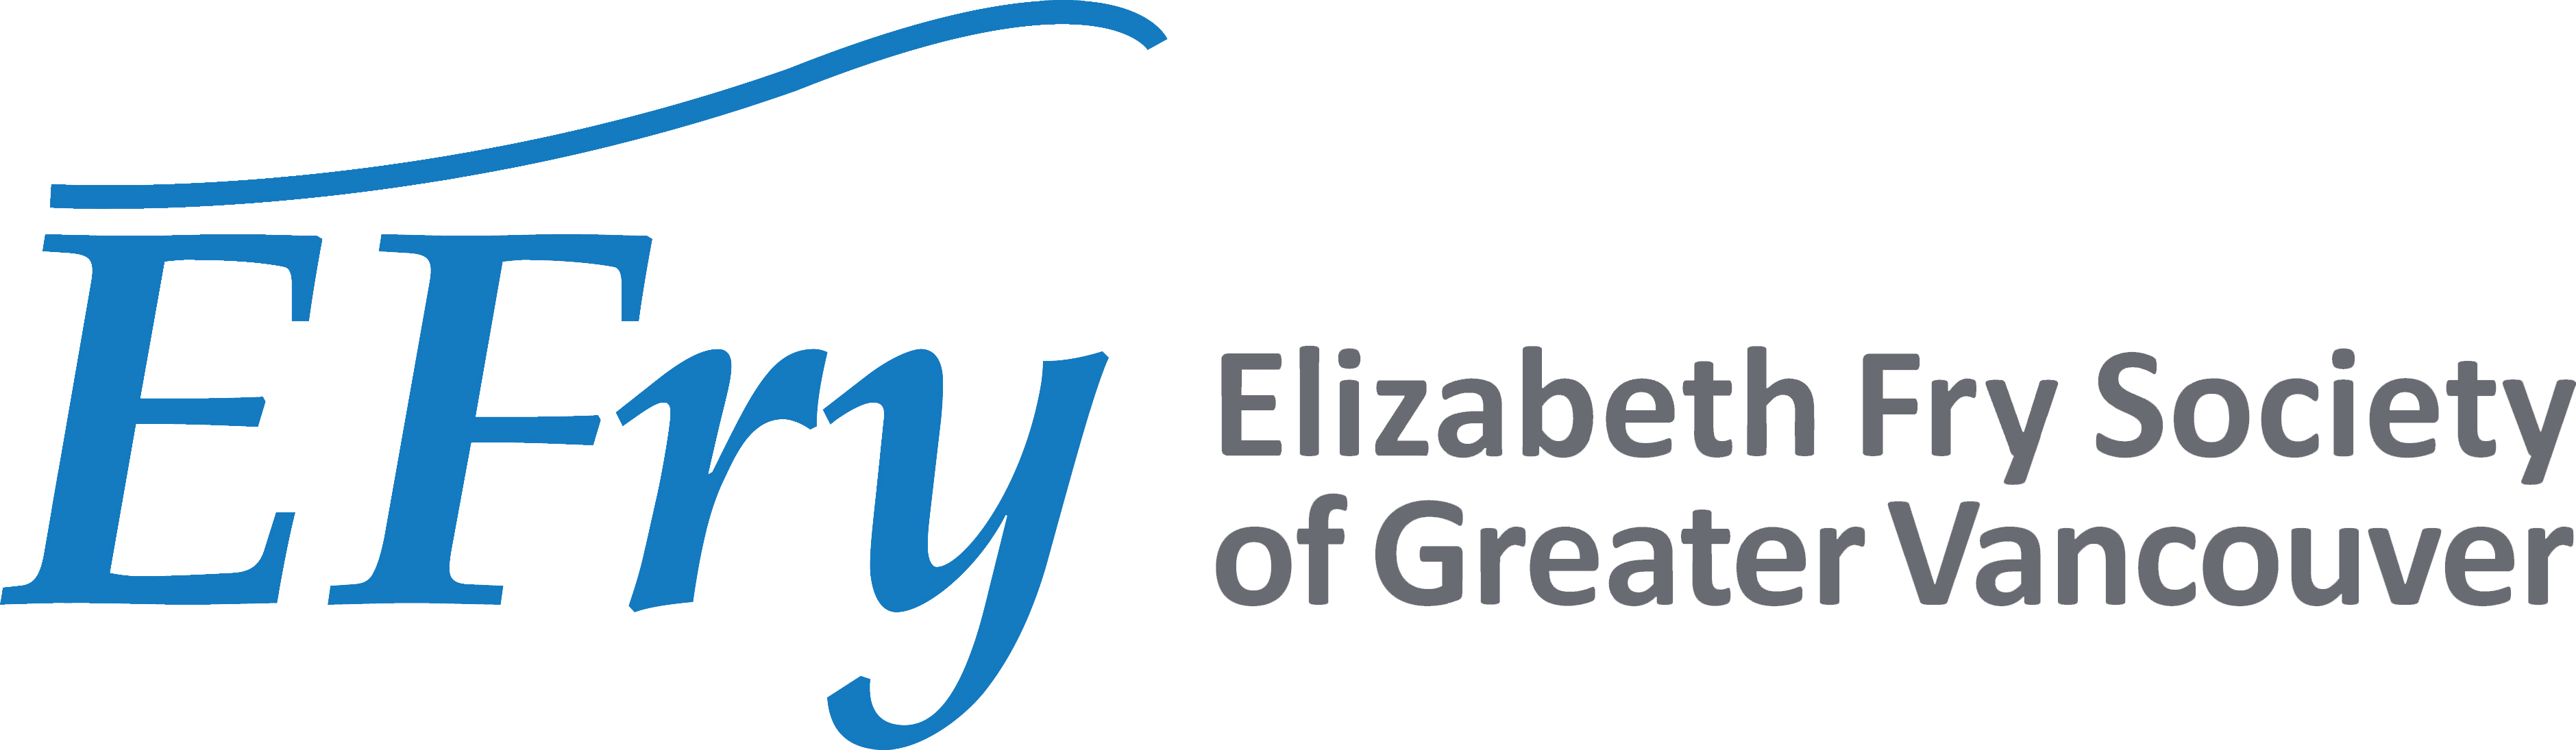 Elizabeth Fry Society of Greater Vancouver